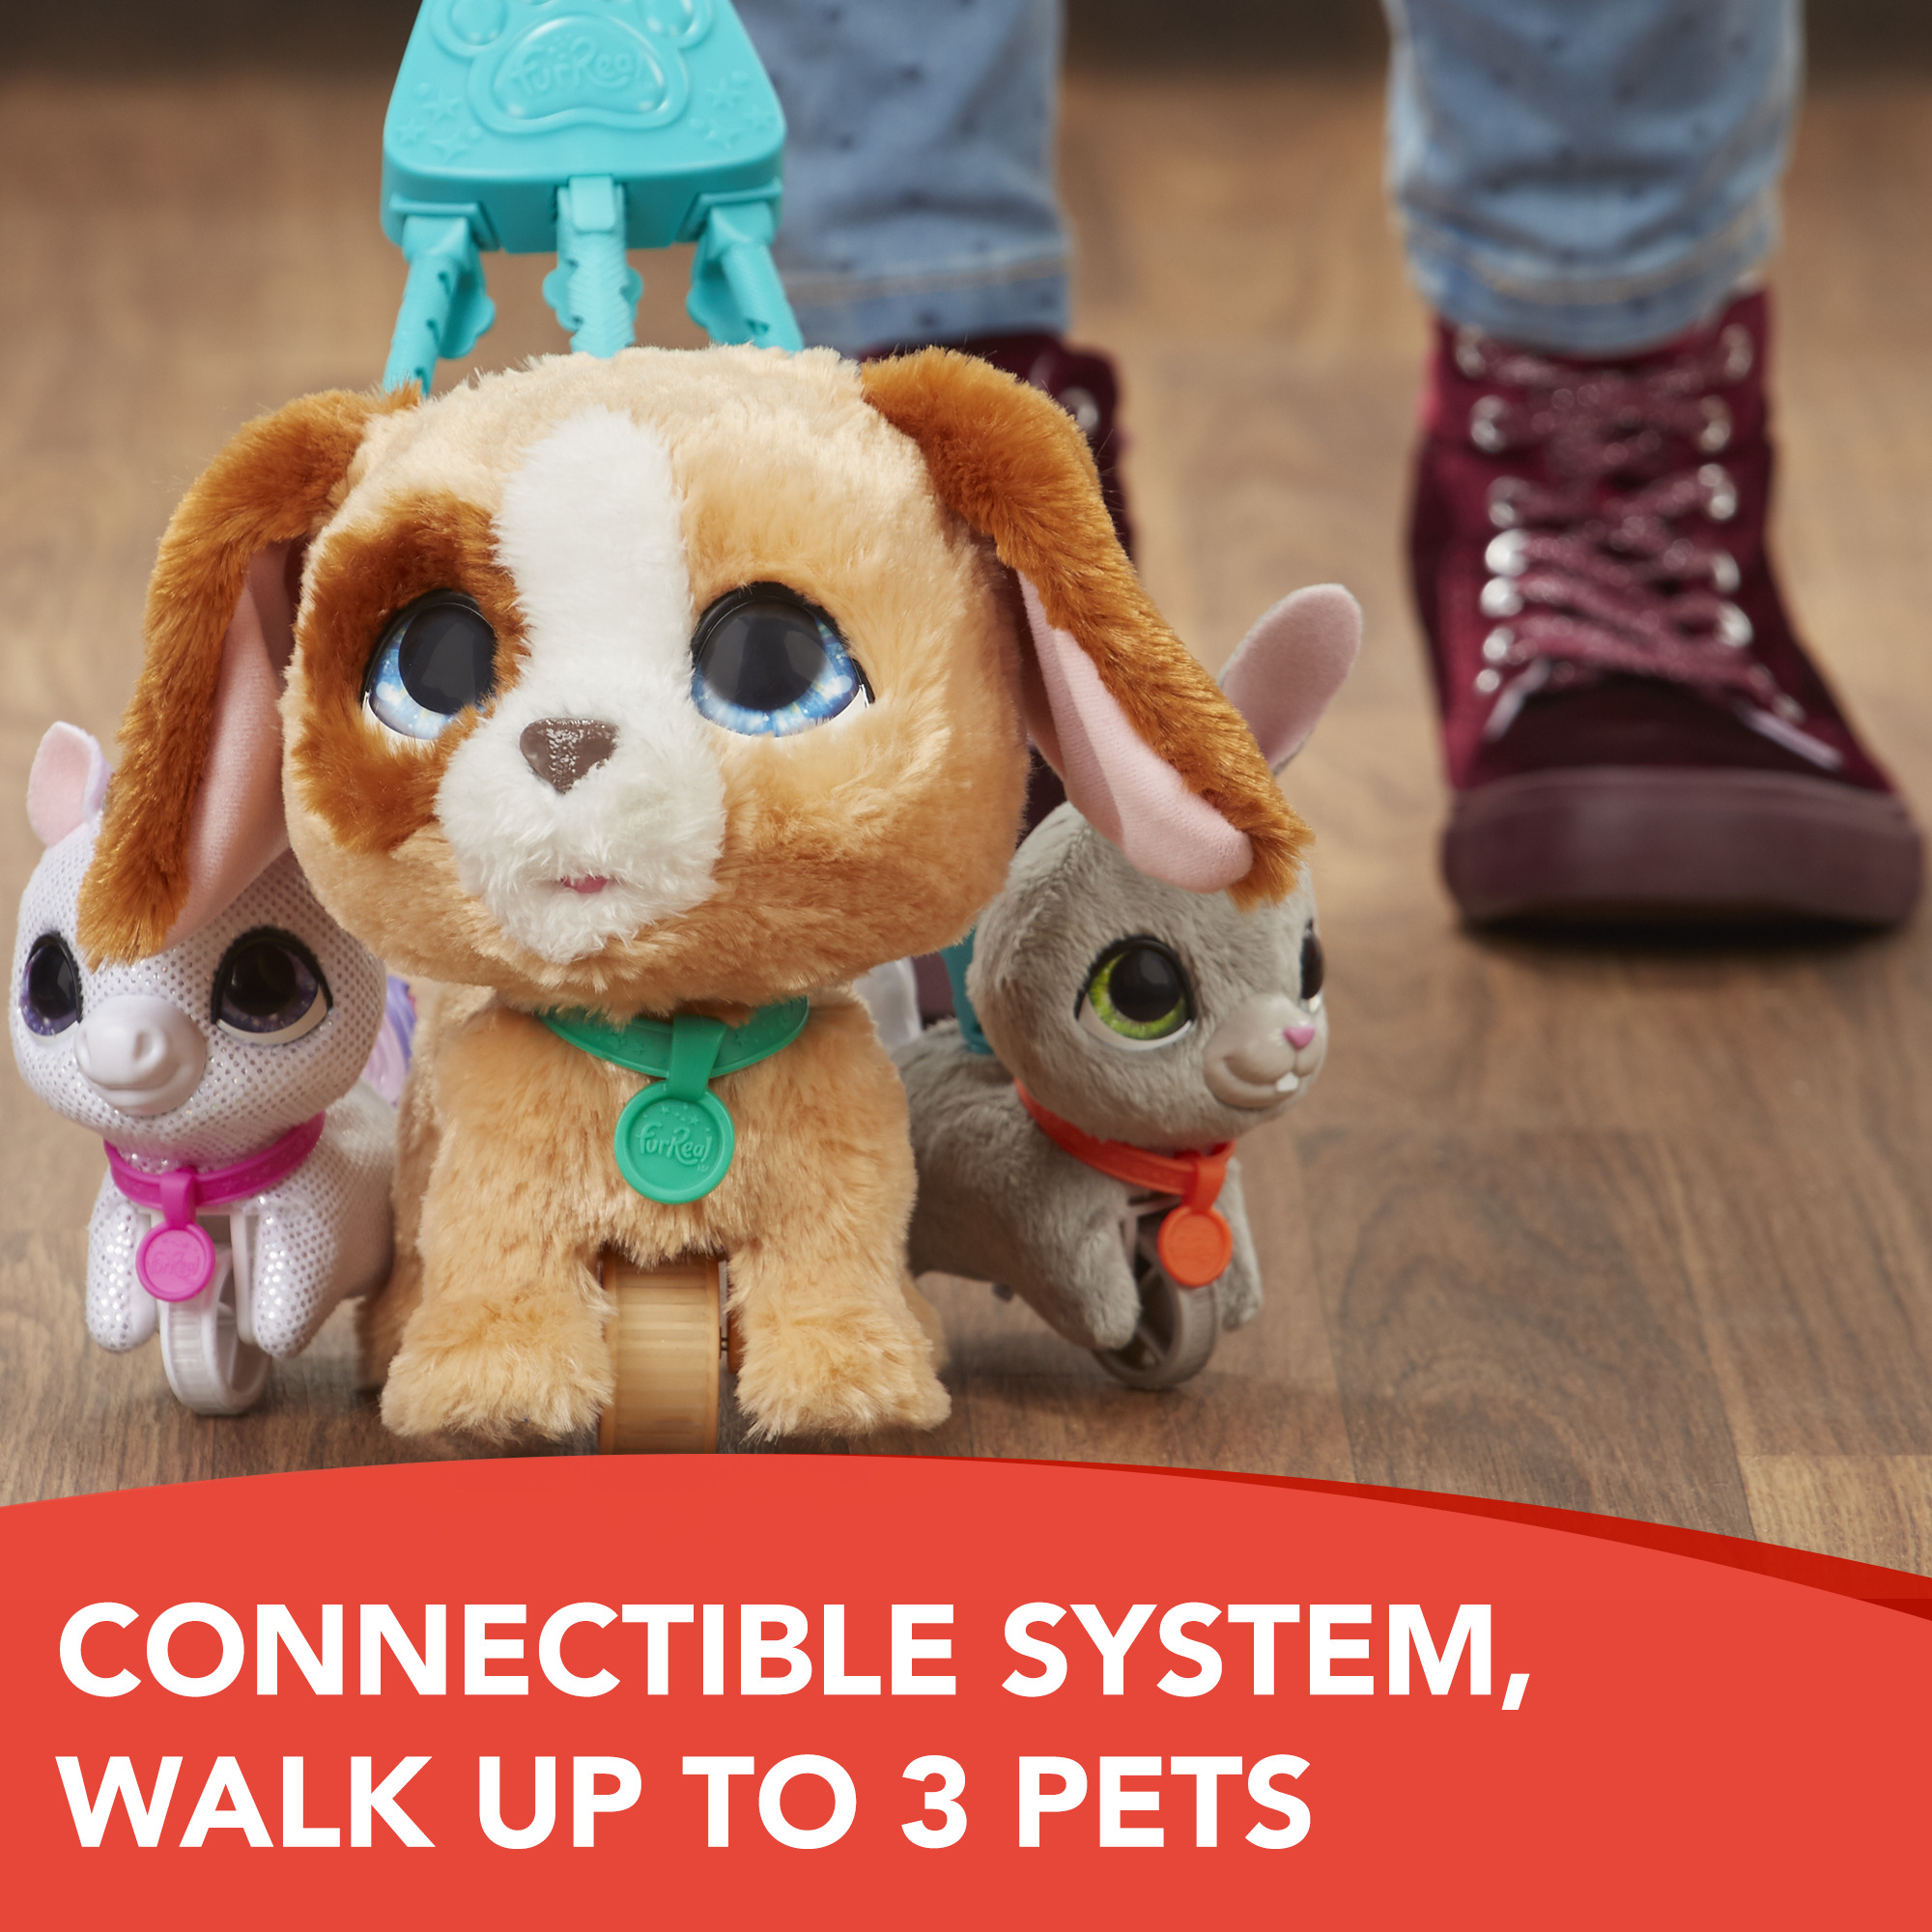 furReal Walkalots Big Wags Puppy, for Kids Ages 4 and Up, Includes Leash - image 10 of 14